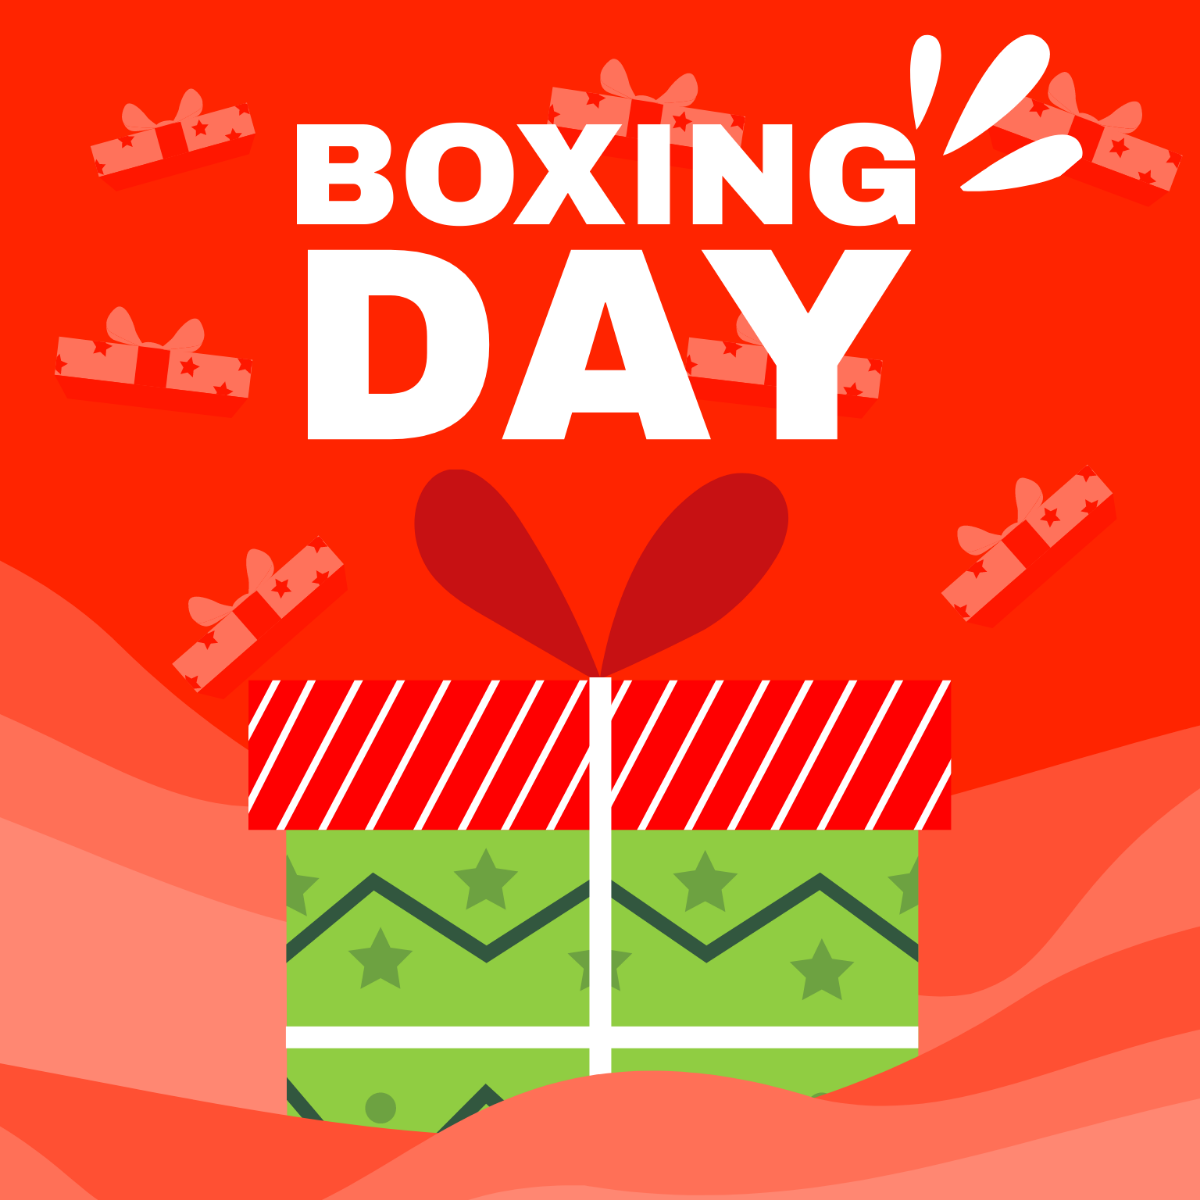 Free Boxing Day Illustrator Template